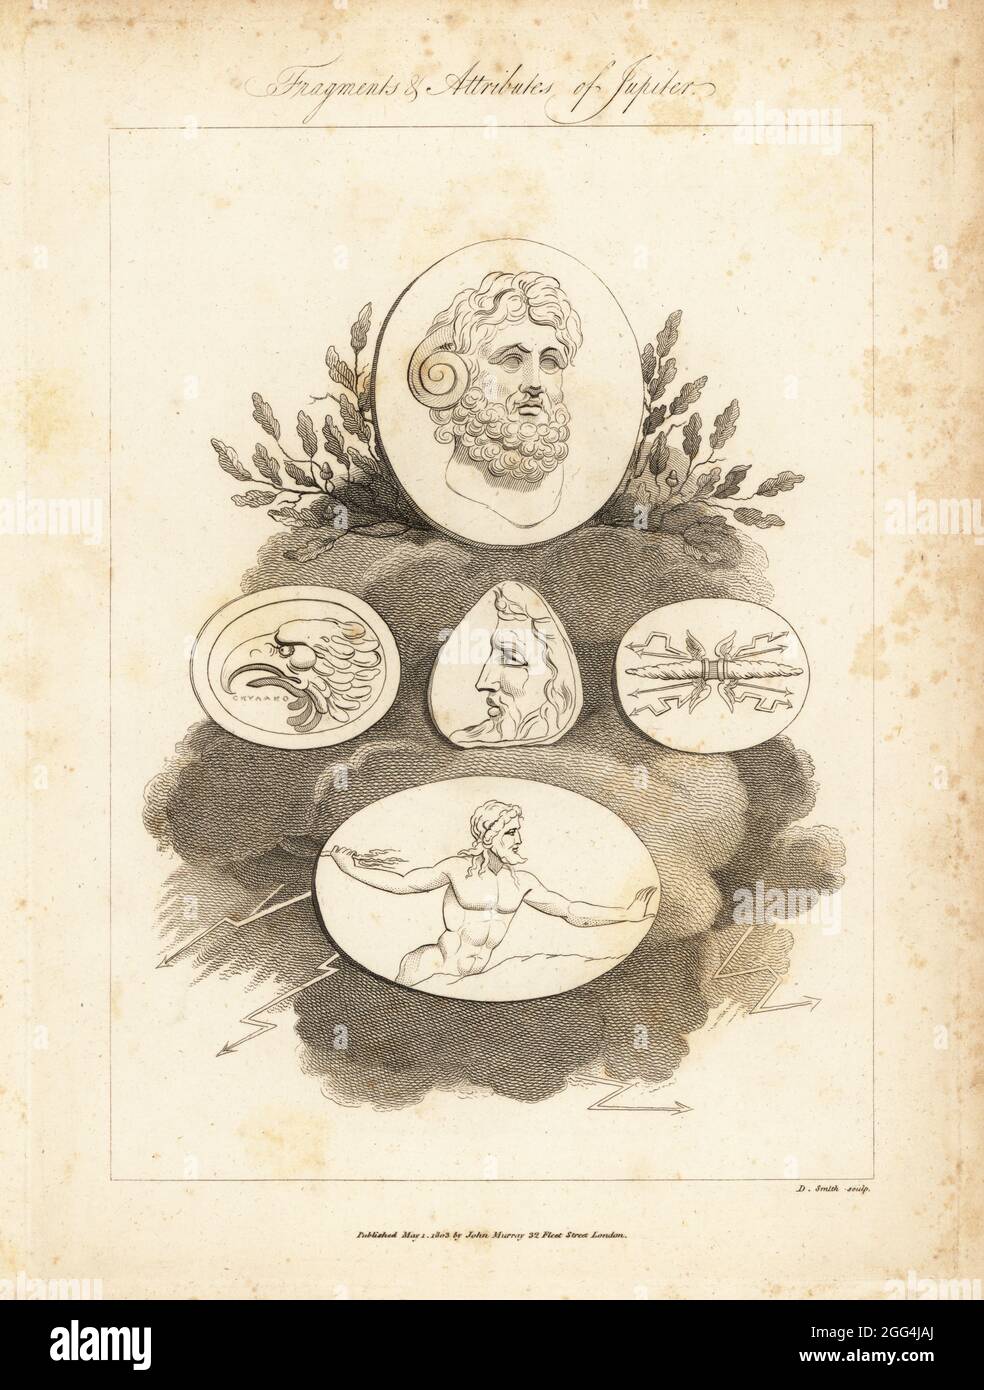 Fragments and attributes of Roman god Jupiter. Jupiter Ammon with horns on cornelian from the Museum of Florence (top), profile of Jupiter on garnet in Mr Townley's collection (center) and Jupiter Tonans with thunderbolt on sulphur (bottom), eagle (right) and fulmen (left). Copperplate engraving by D. Smith after an illustration by Richard Dagley from Gems, Selected from the Antique, with Illustrations, John Murray, London, 1804. Stock Photo